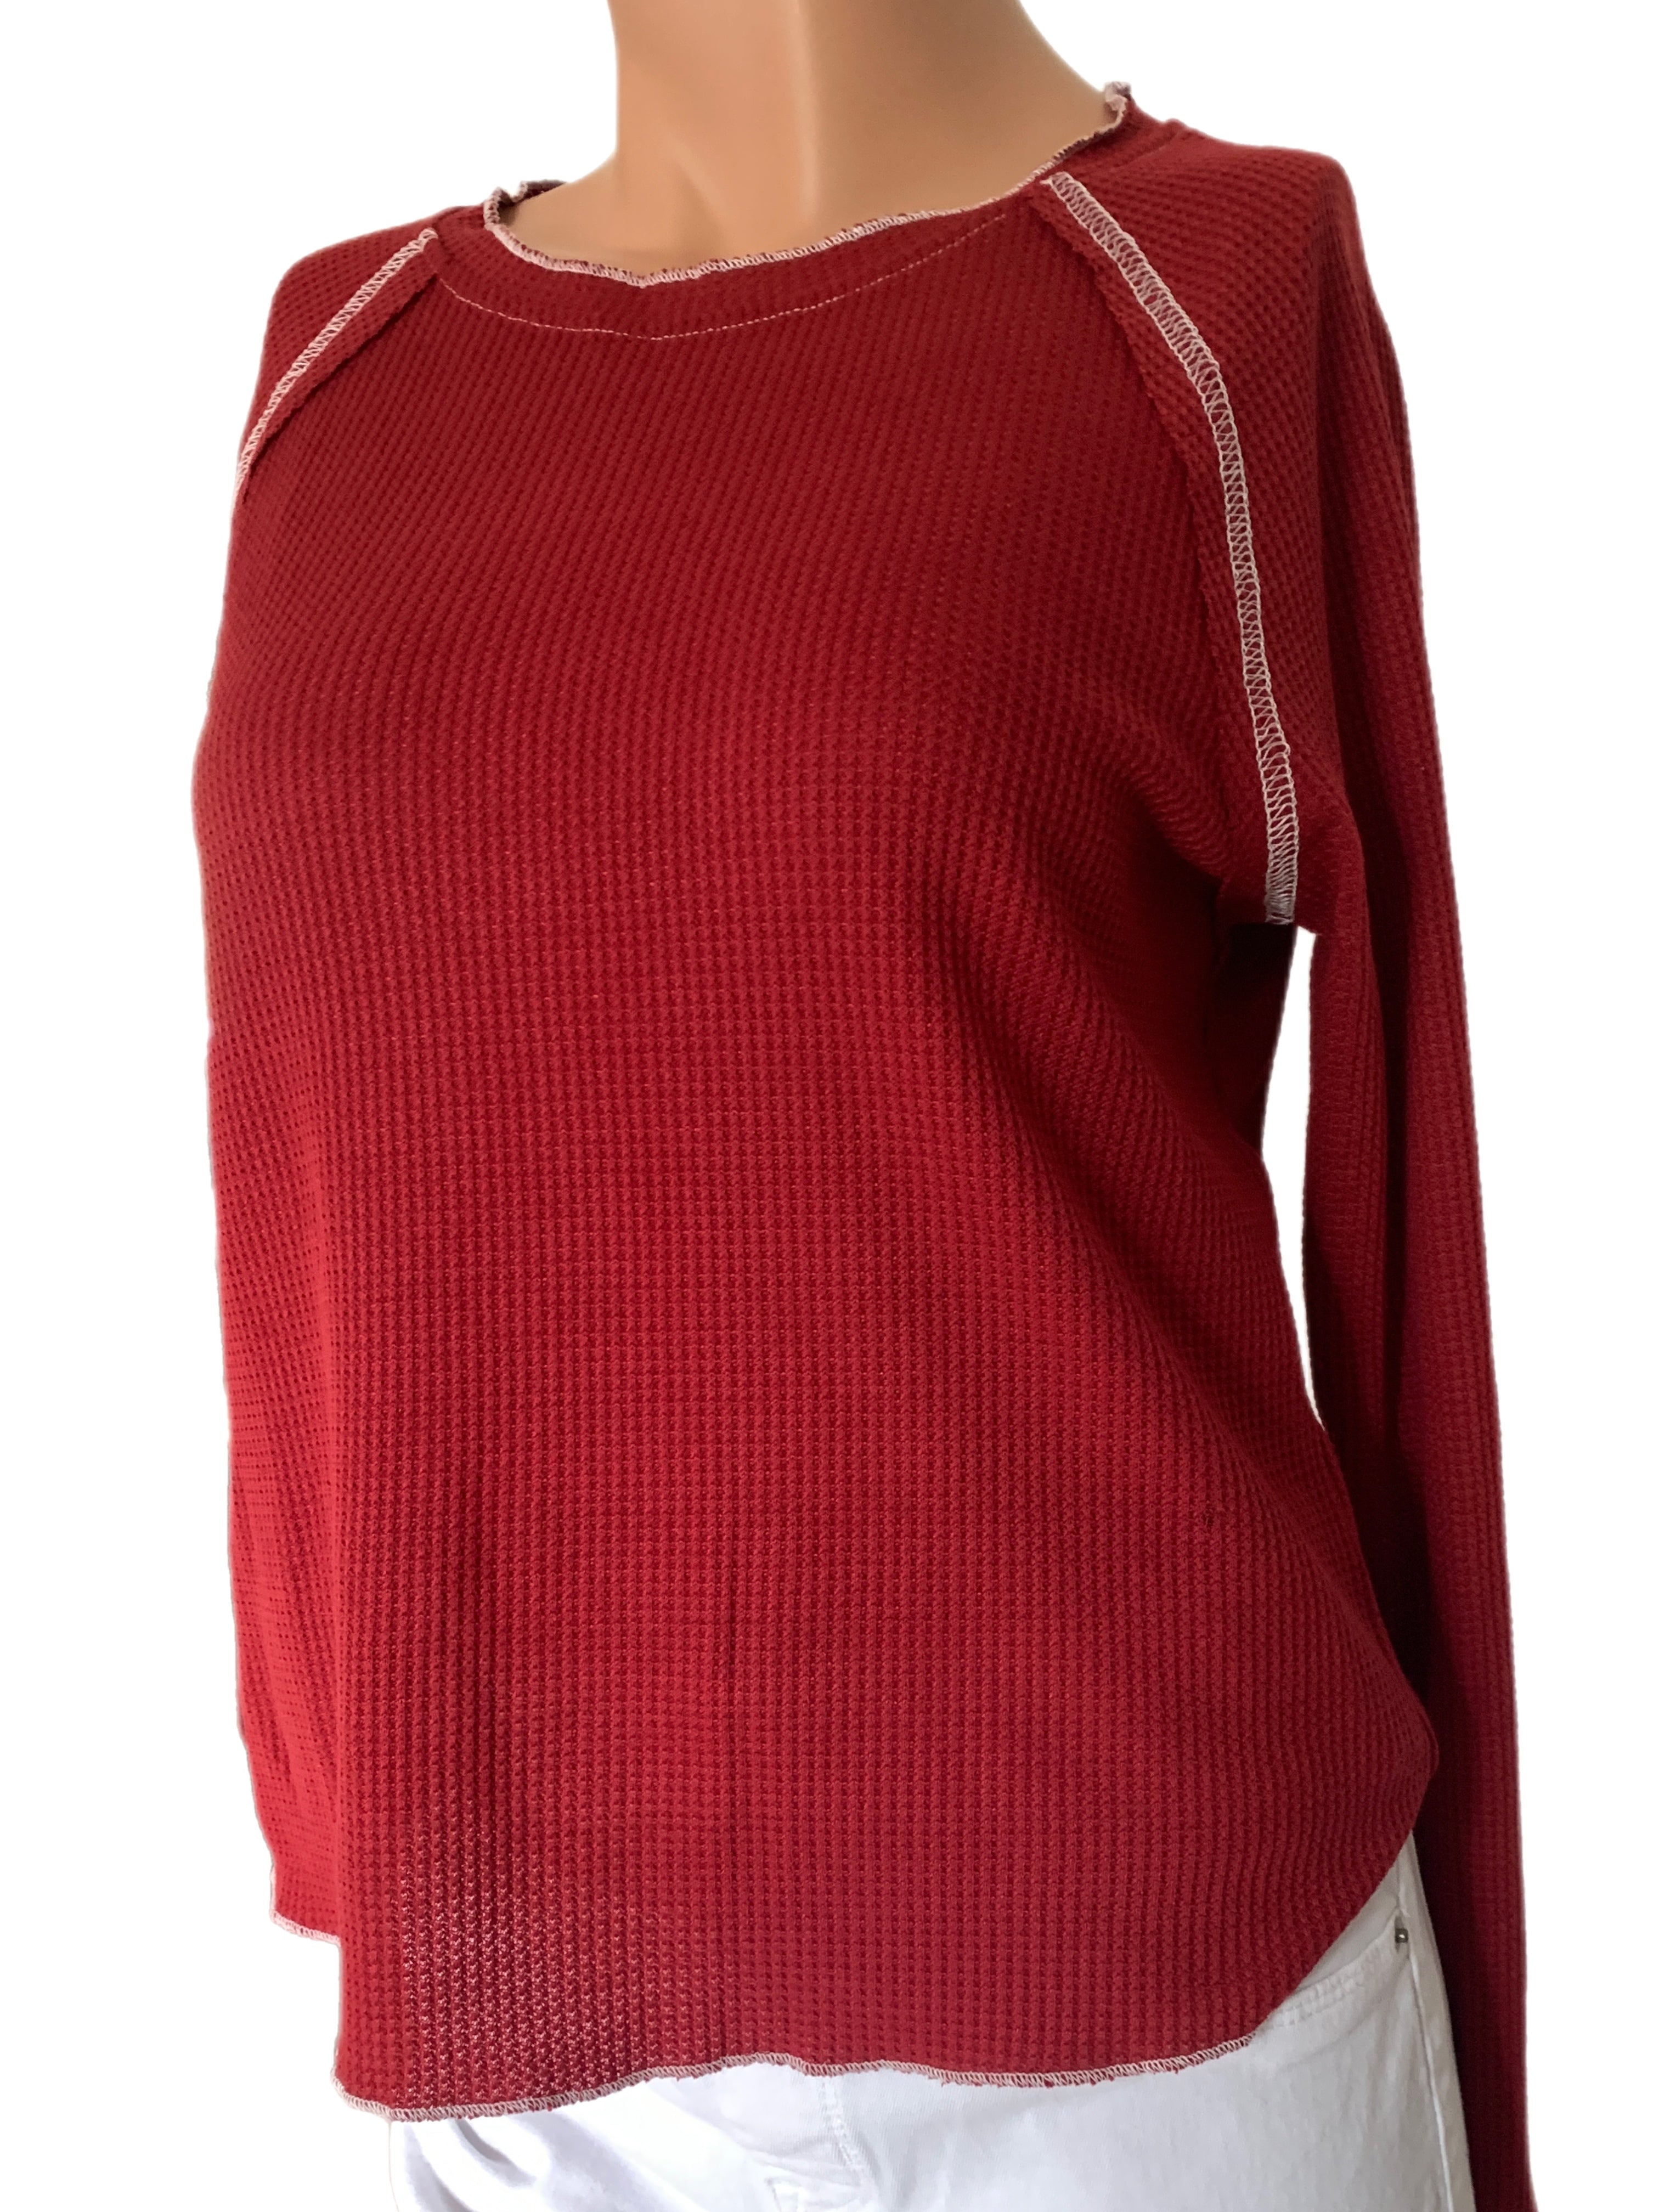 Deep Red Long Sleeve Exposed Seam Lightweight Waffle Knit Top